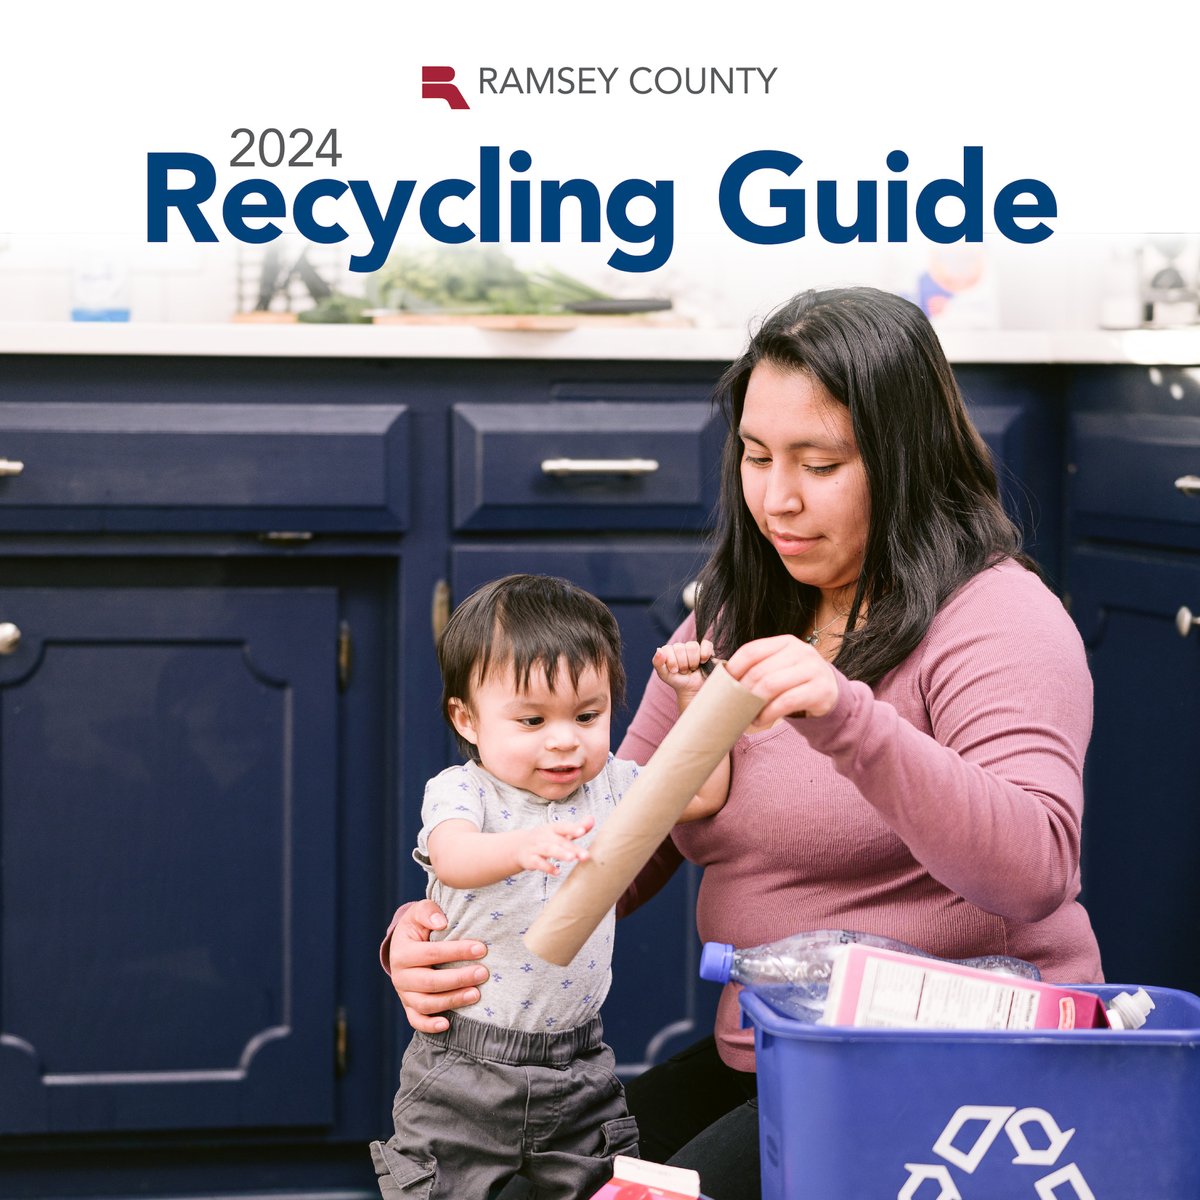 Look for our 2024 Recycling Guide in your mailbox this week! It's packed with information about recycling, food scraps collection, household hazardous waste and more. #RamseyRecycles